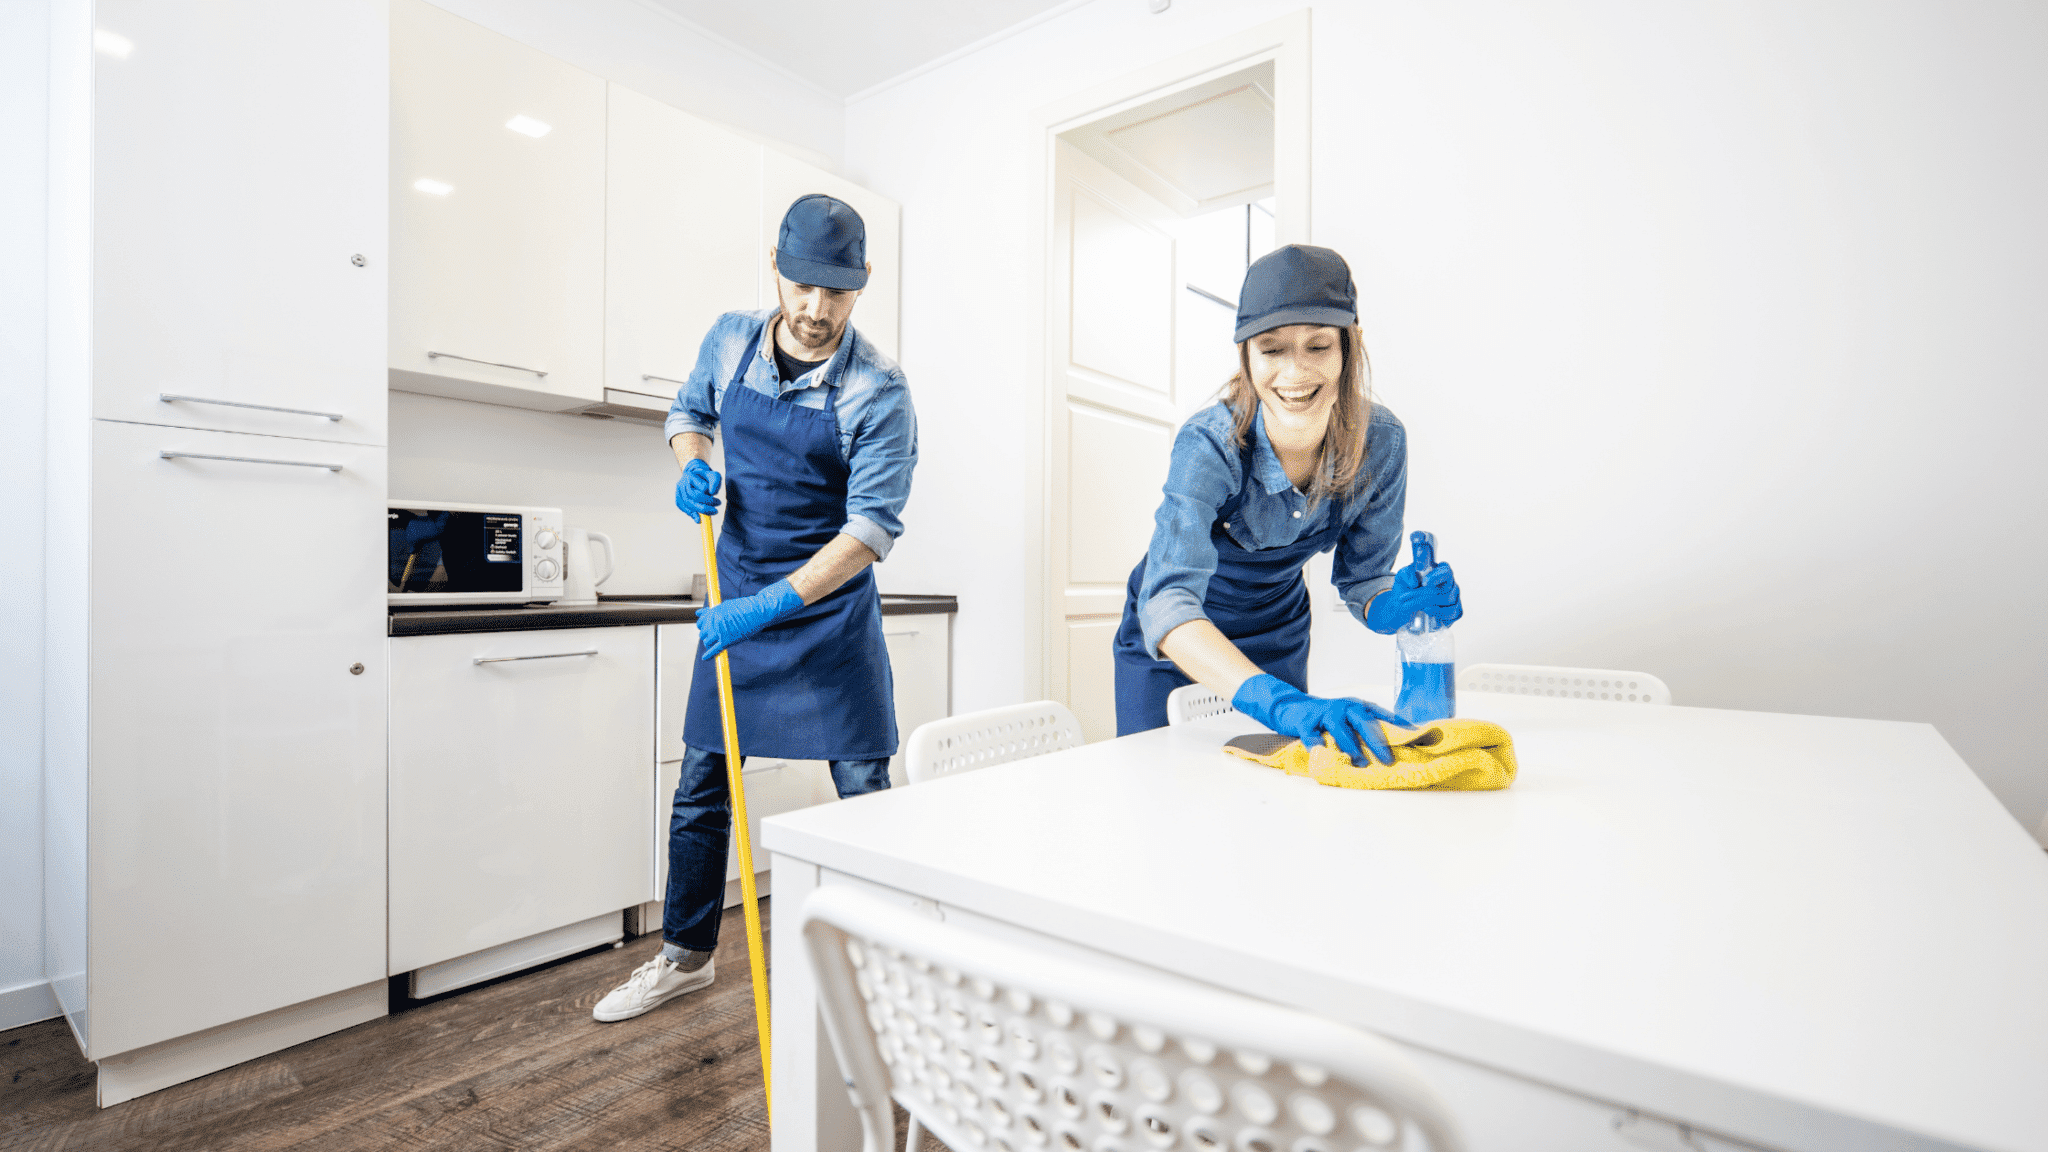 Airbnb Hosting Two maids cleaning a kitchen table for an Airbnb hosting business.